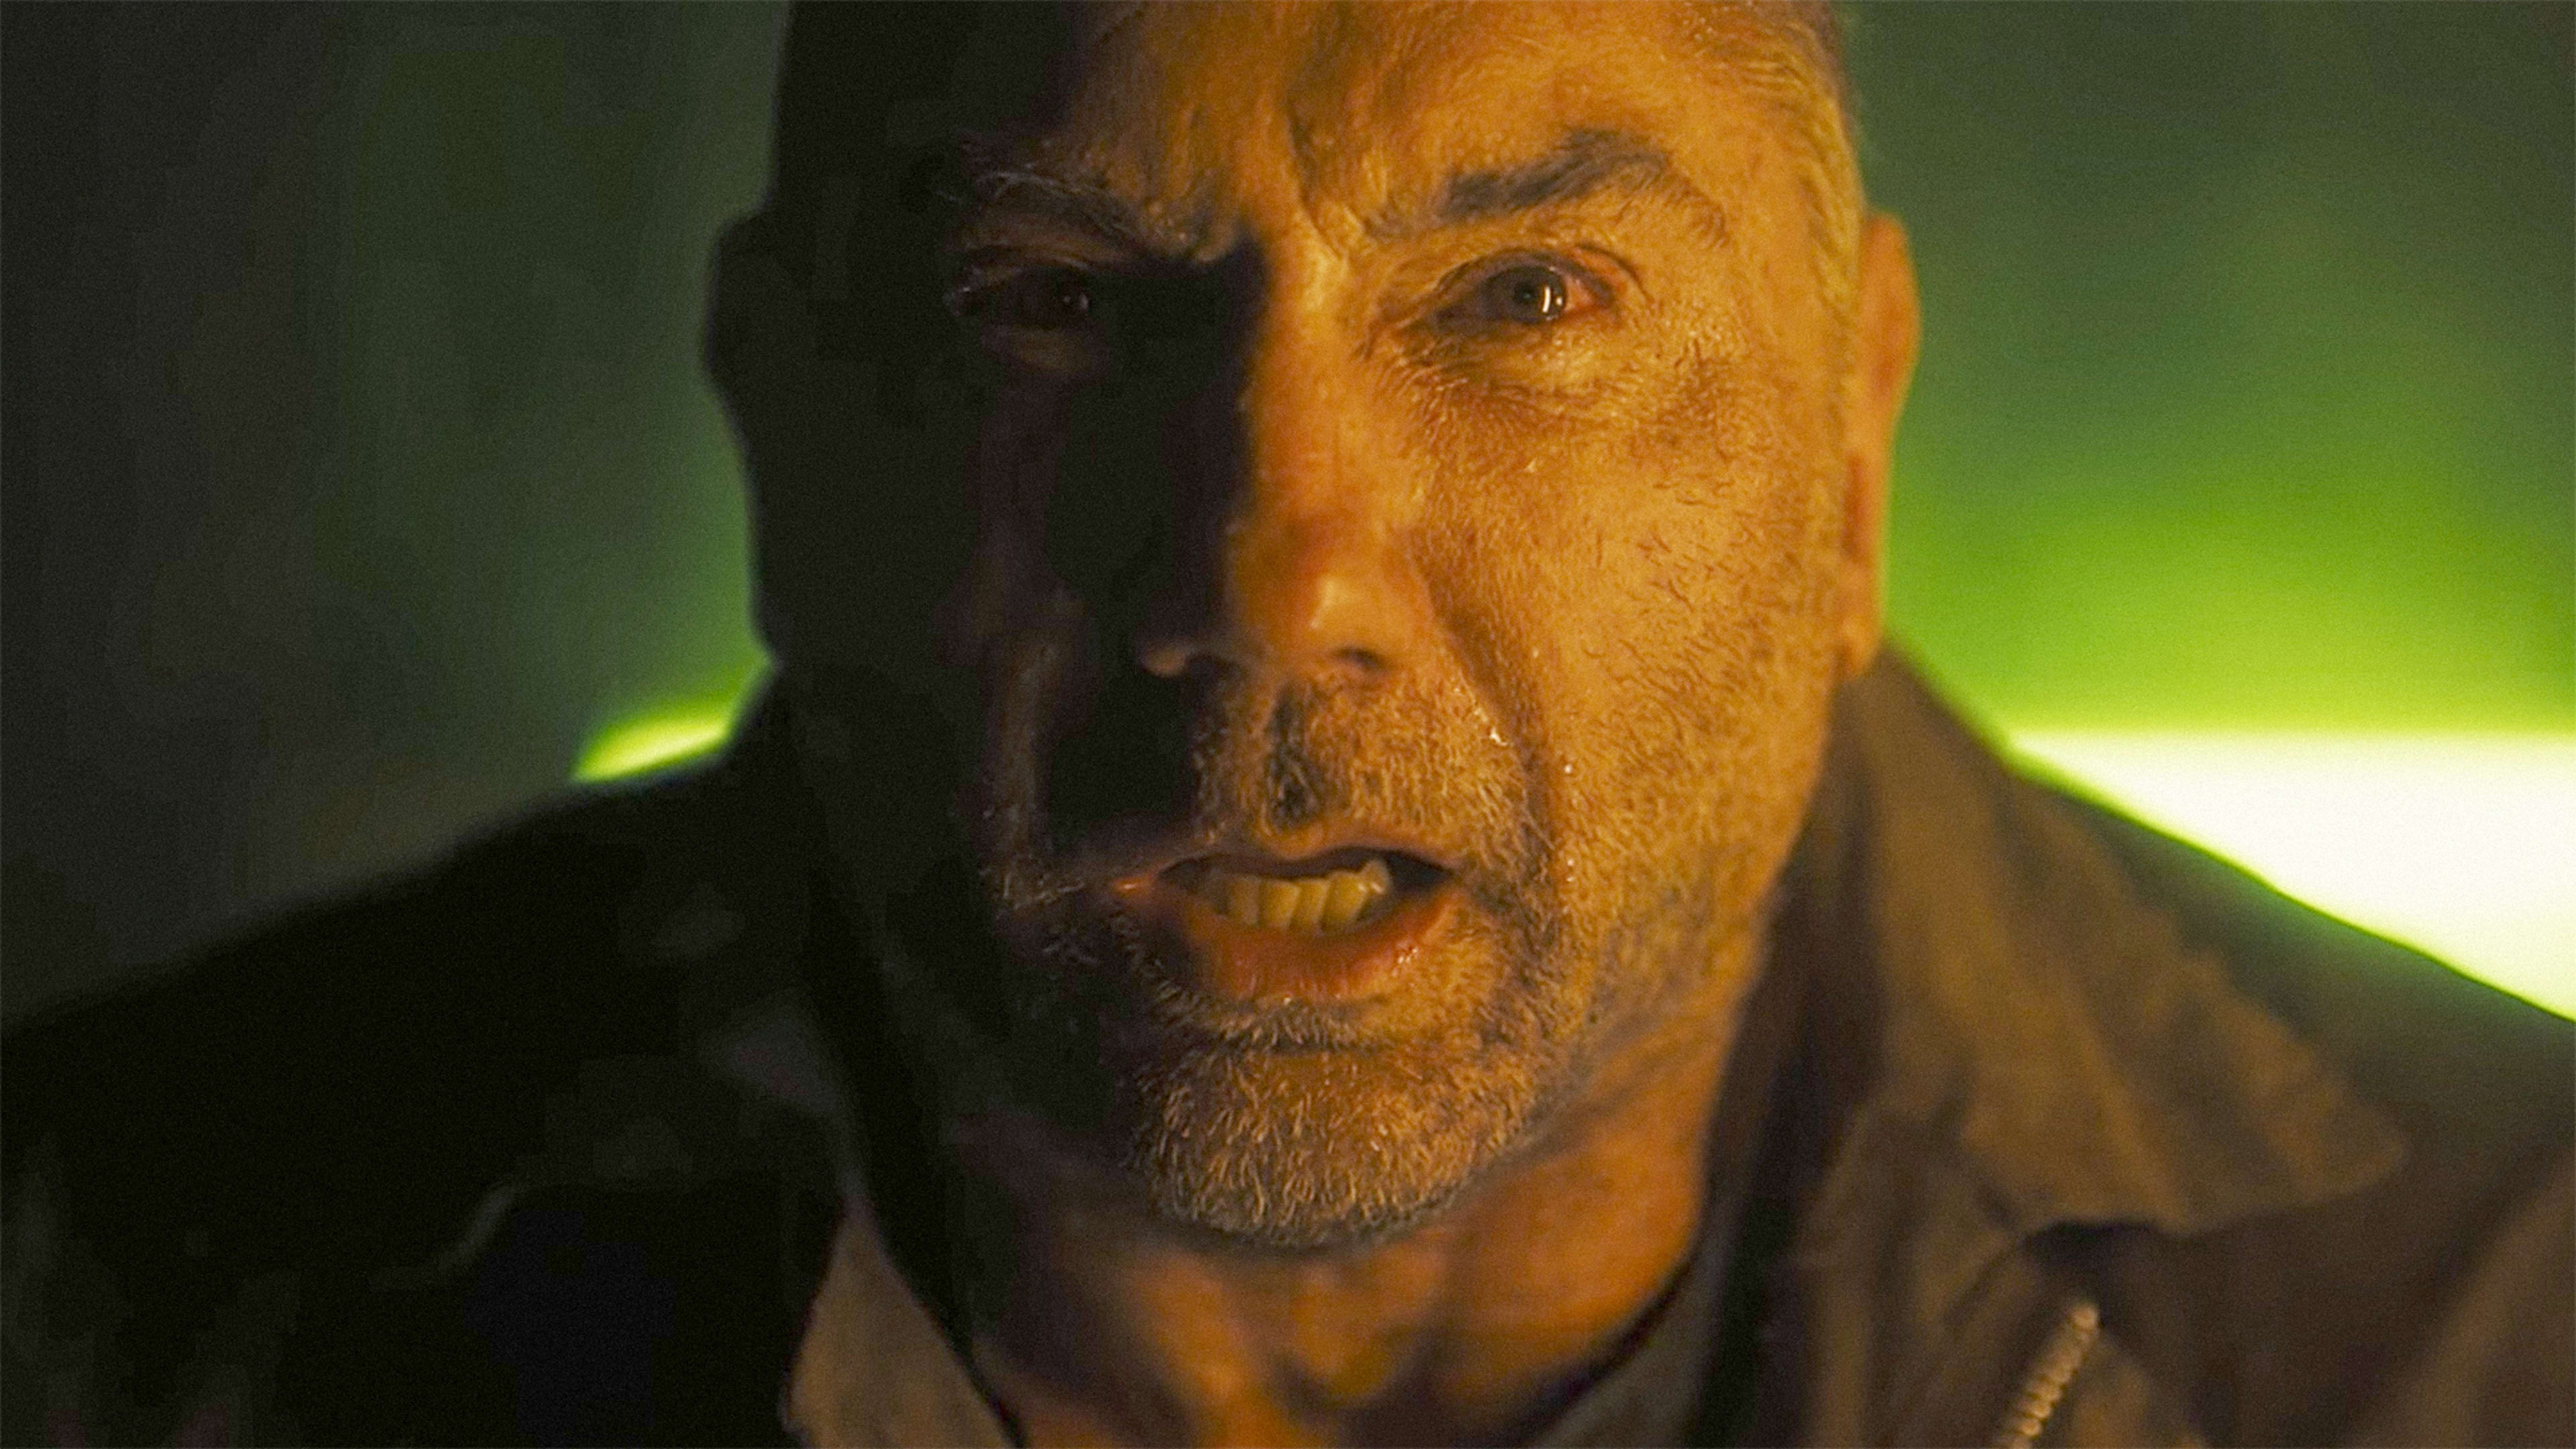 Dave Bautista Stars In A New Short Film Prologue For “Blade Runner 2049”